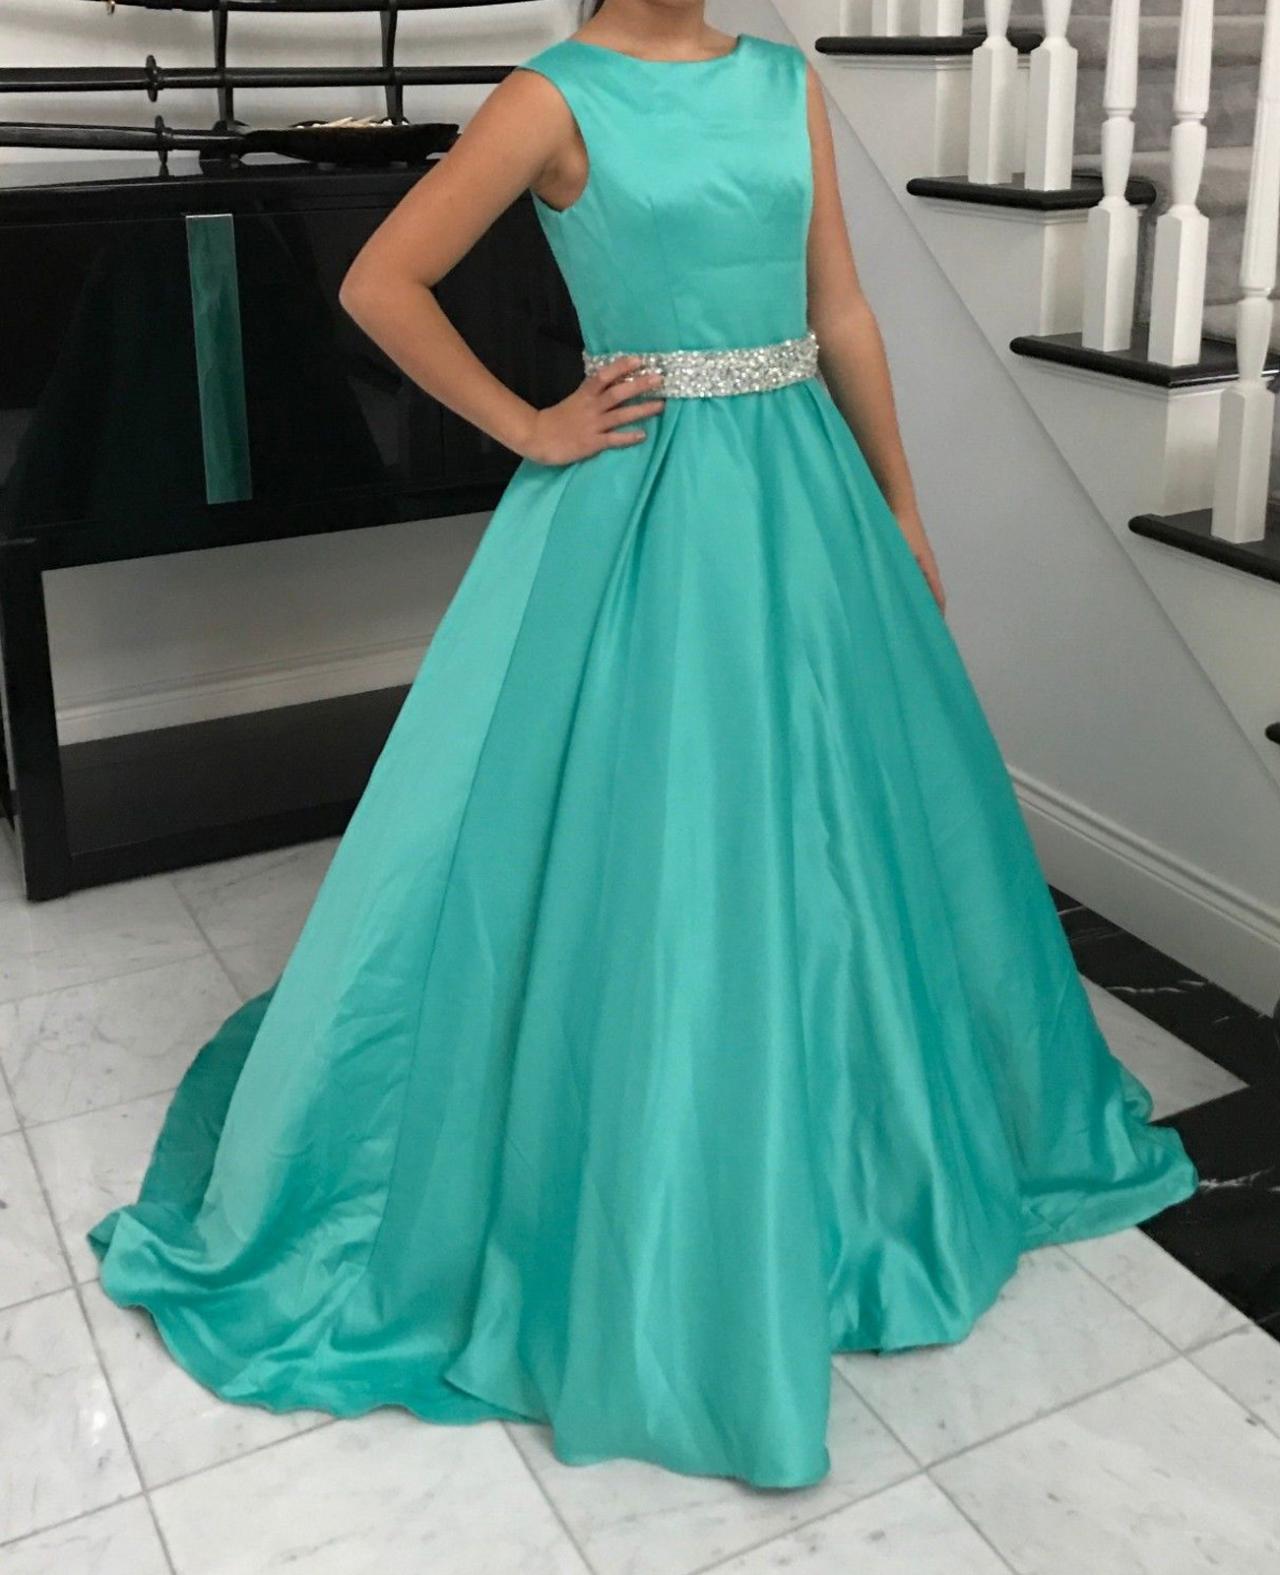 Turquoise Floor Length Beaded Satin Prom Dresses Featuring Zipper Ball Gown Long Elegant Evening Formal Gowns